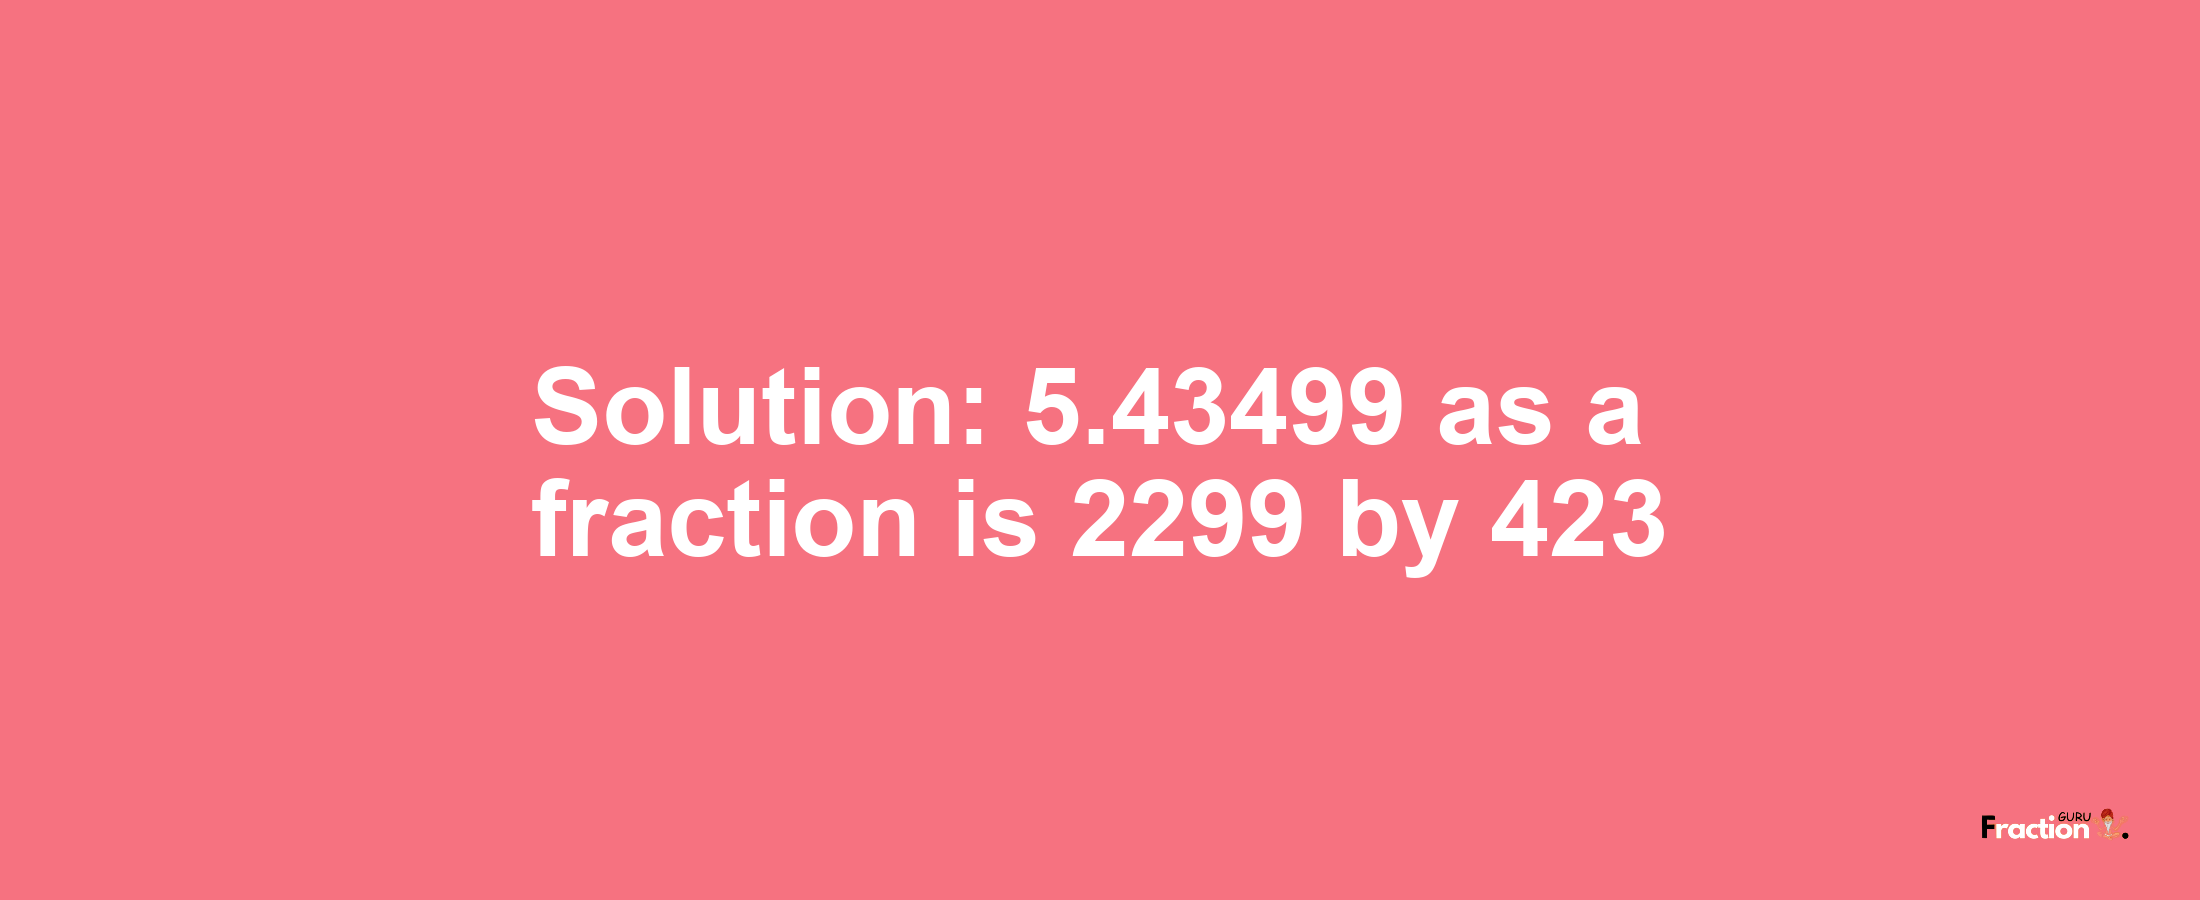 Solution:5.43499 as a fraction is 2299/423